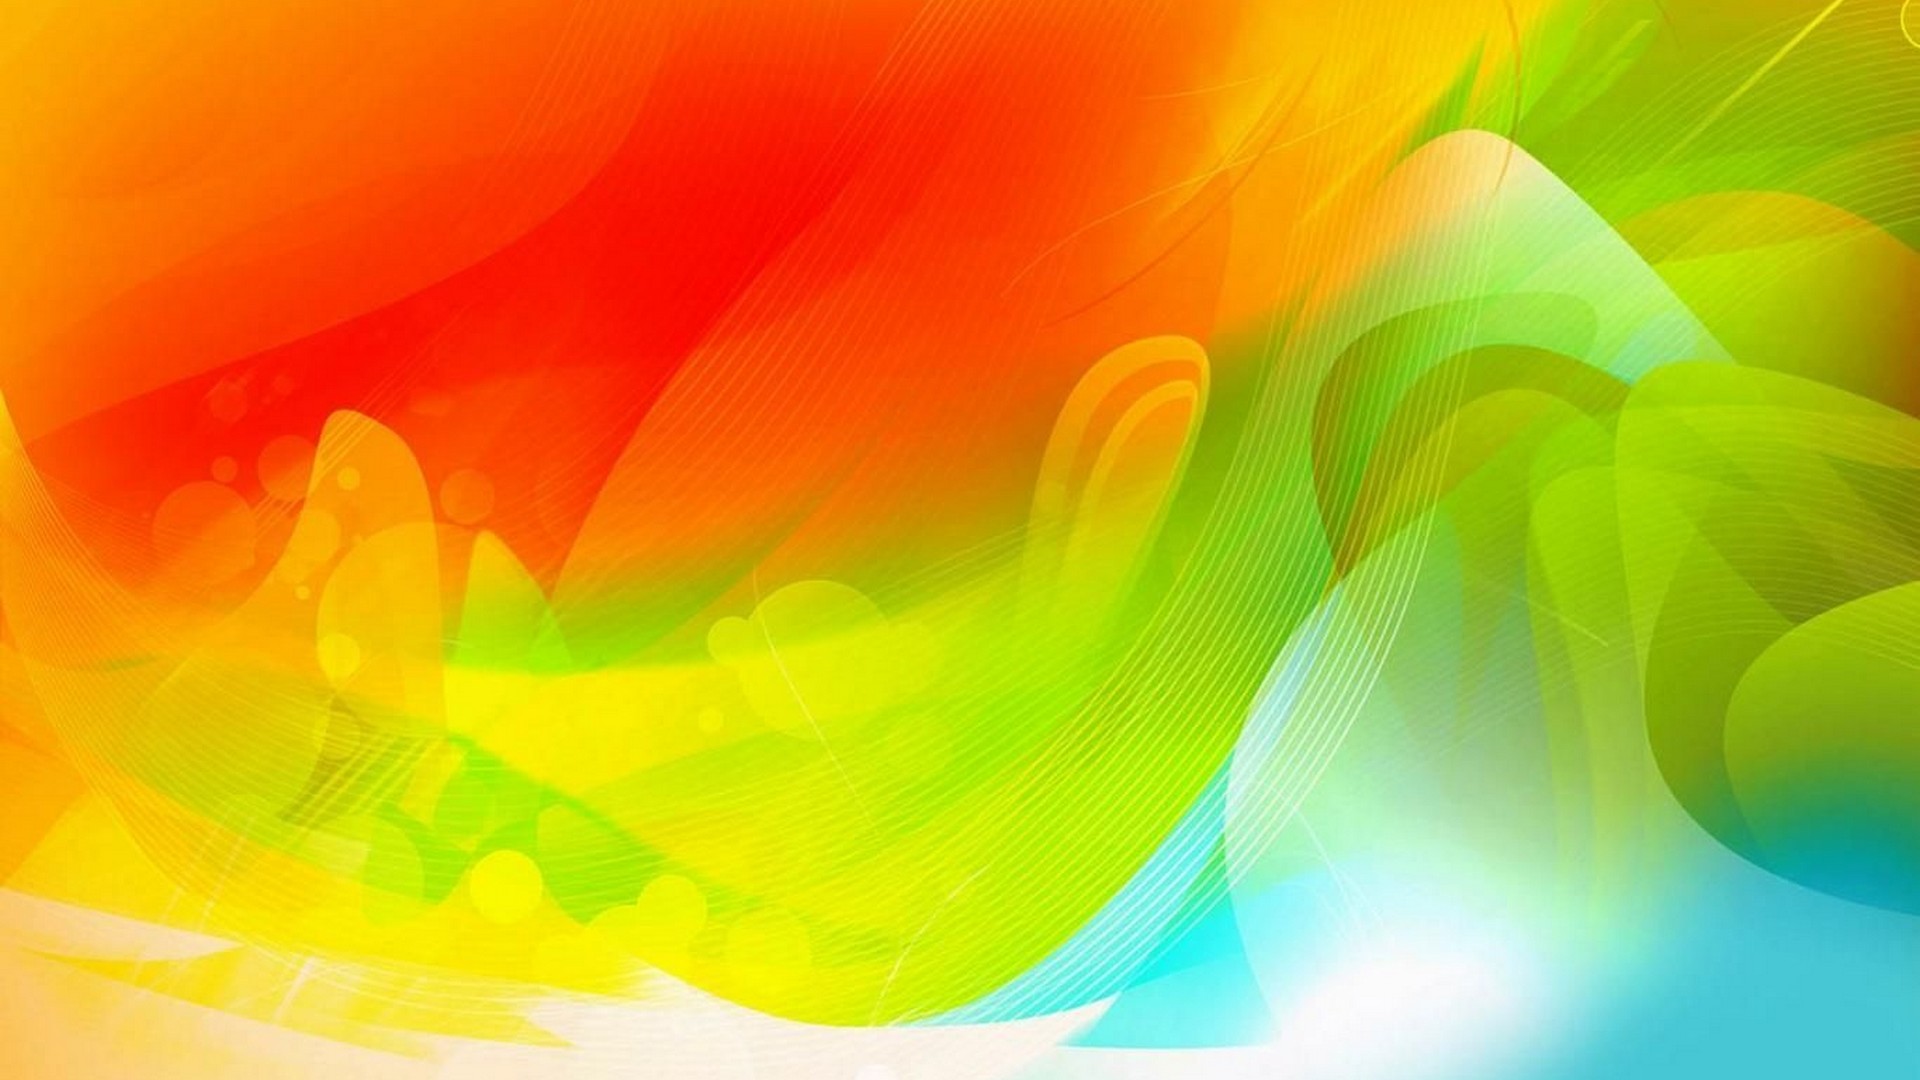 Wallpaper Light Colorful HD with high-resolution 1920x1080 pixel. You can use this wallpaper for your Desktop Computer Backgrounds, Mac Wallpapers, Android Lock screen or iPhone Screensavers and another smartphone device